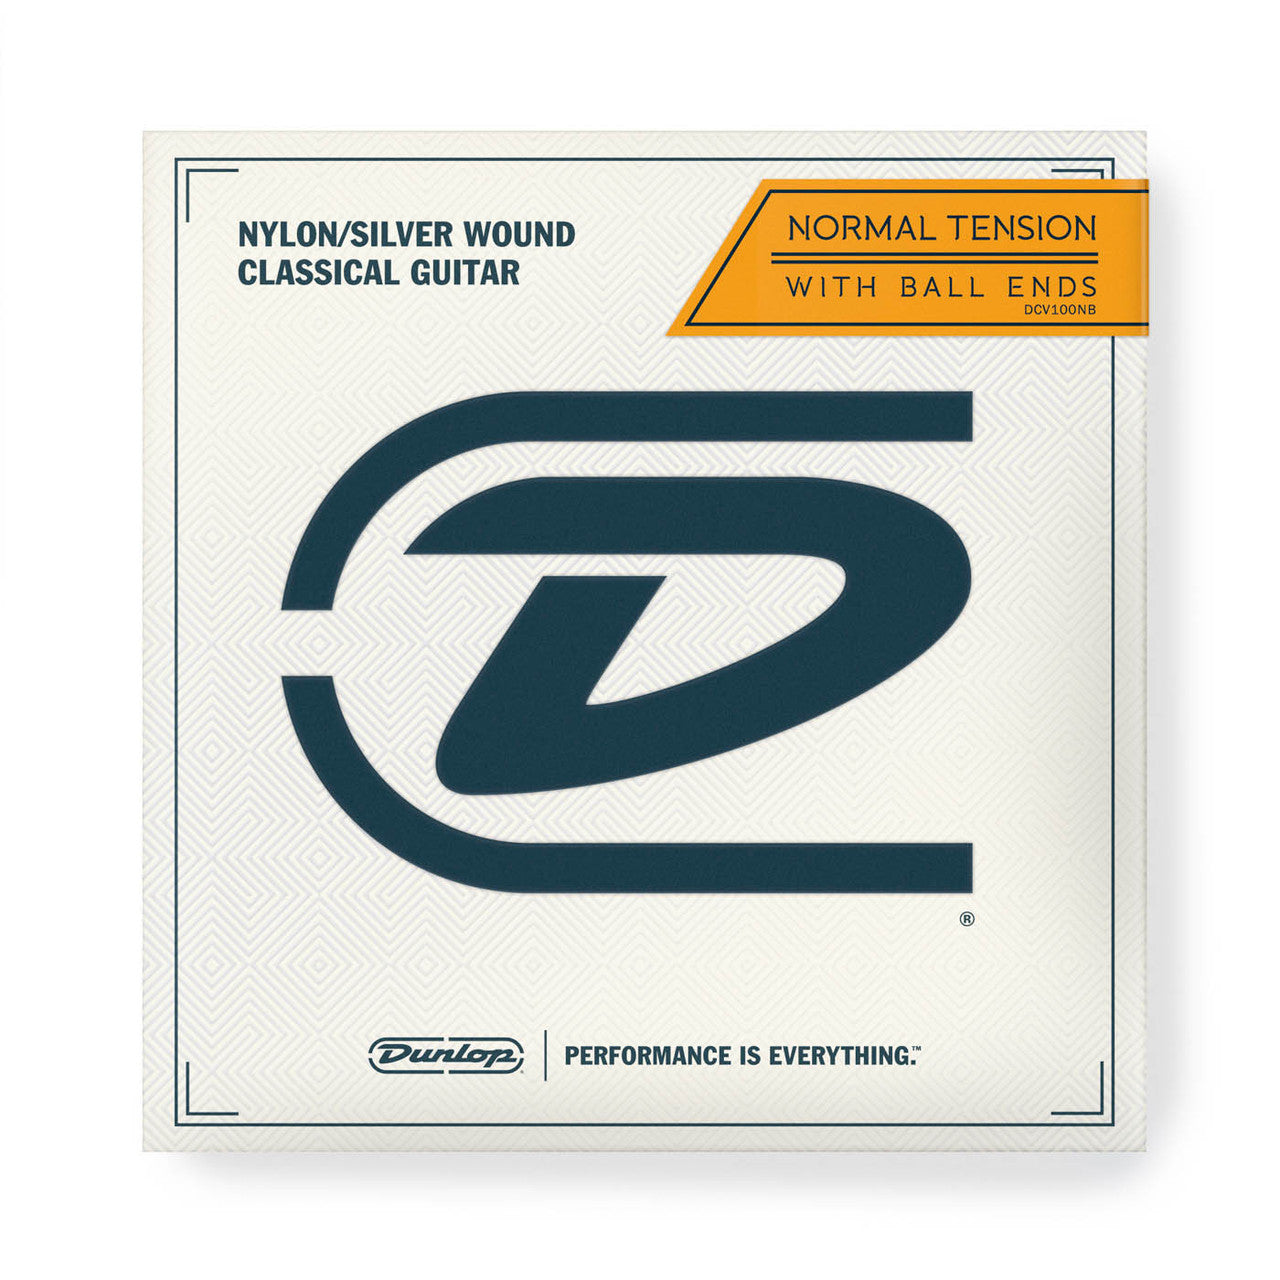 Dunlop Normal Tension Classical Guitar Strings | Ball End